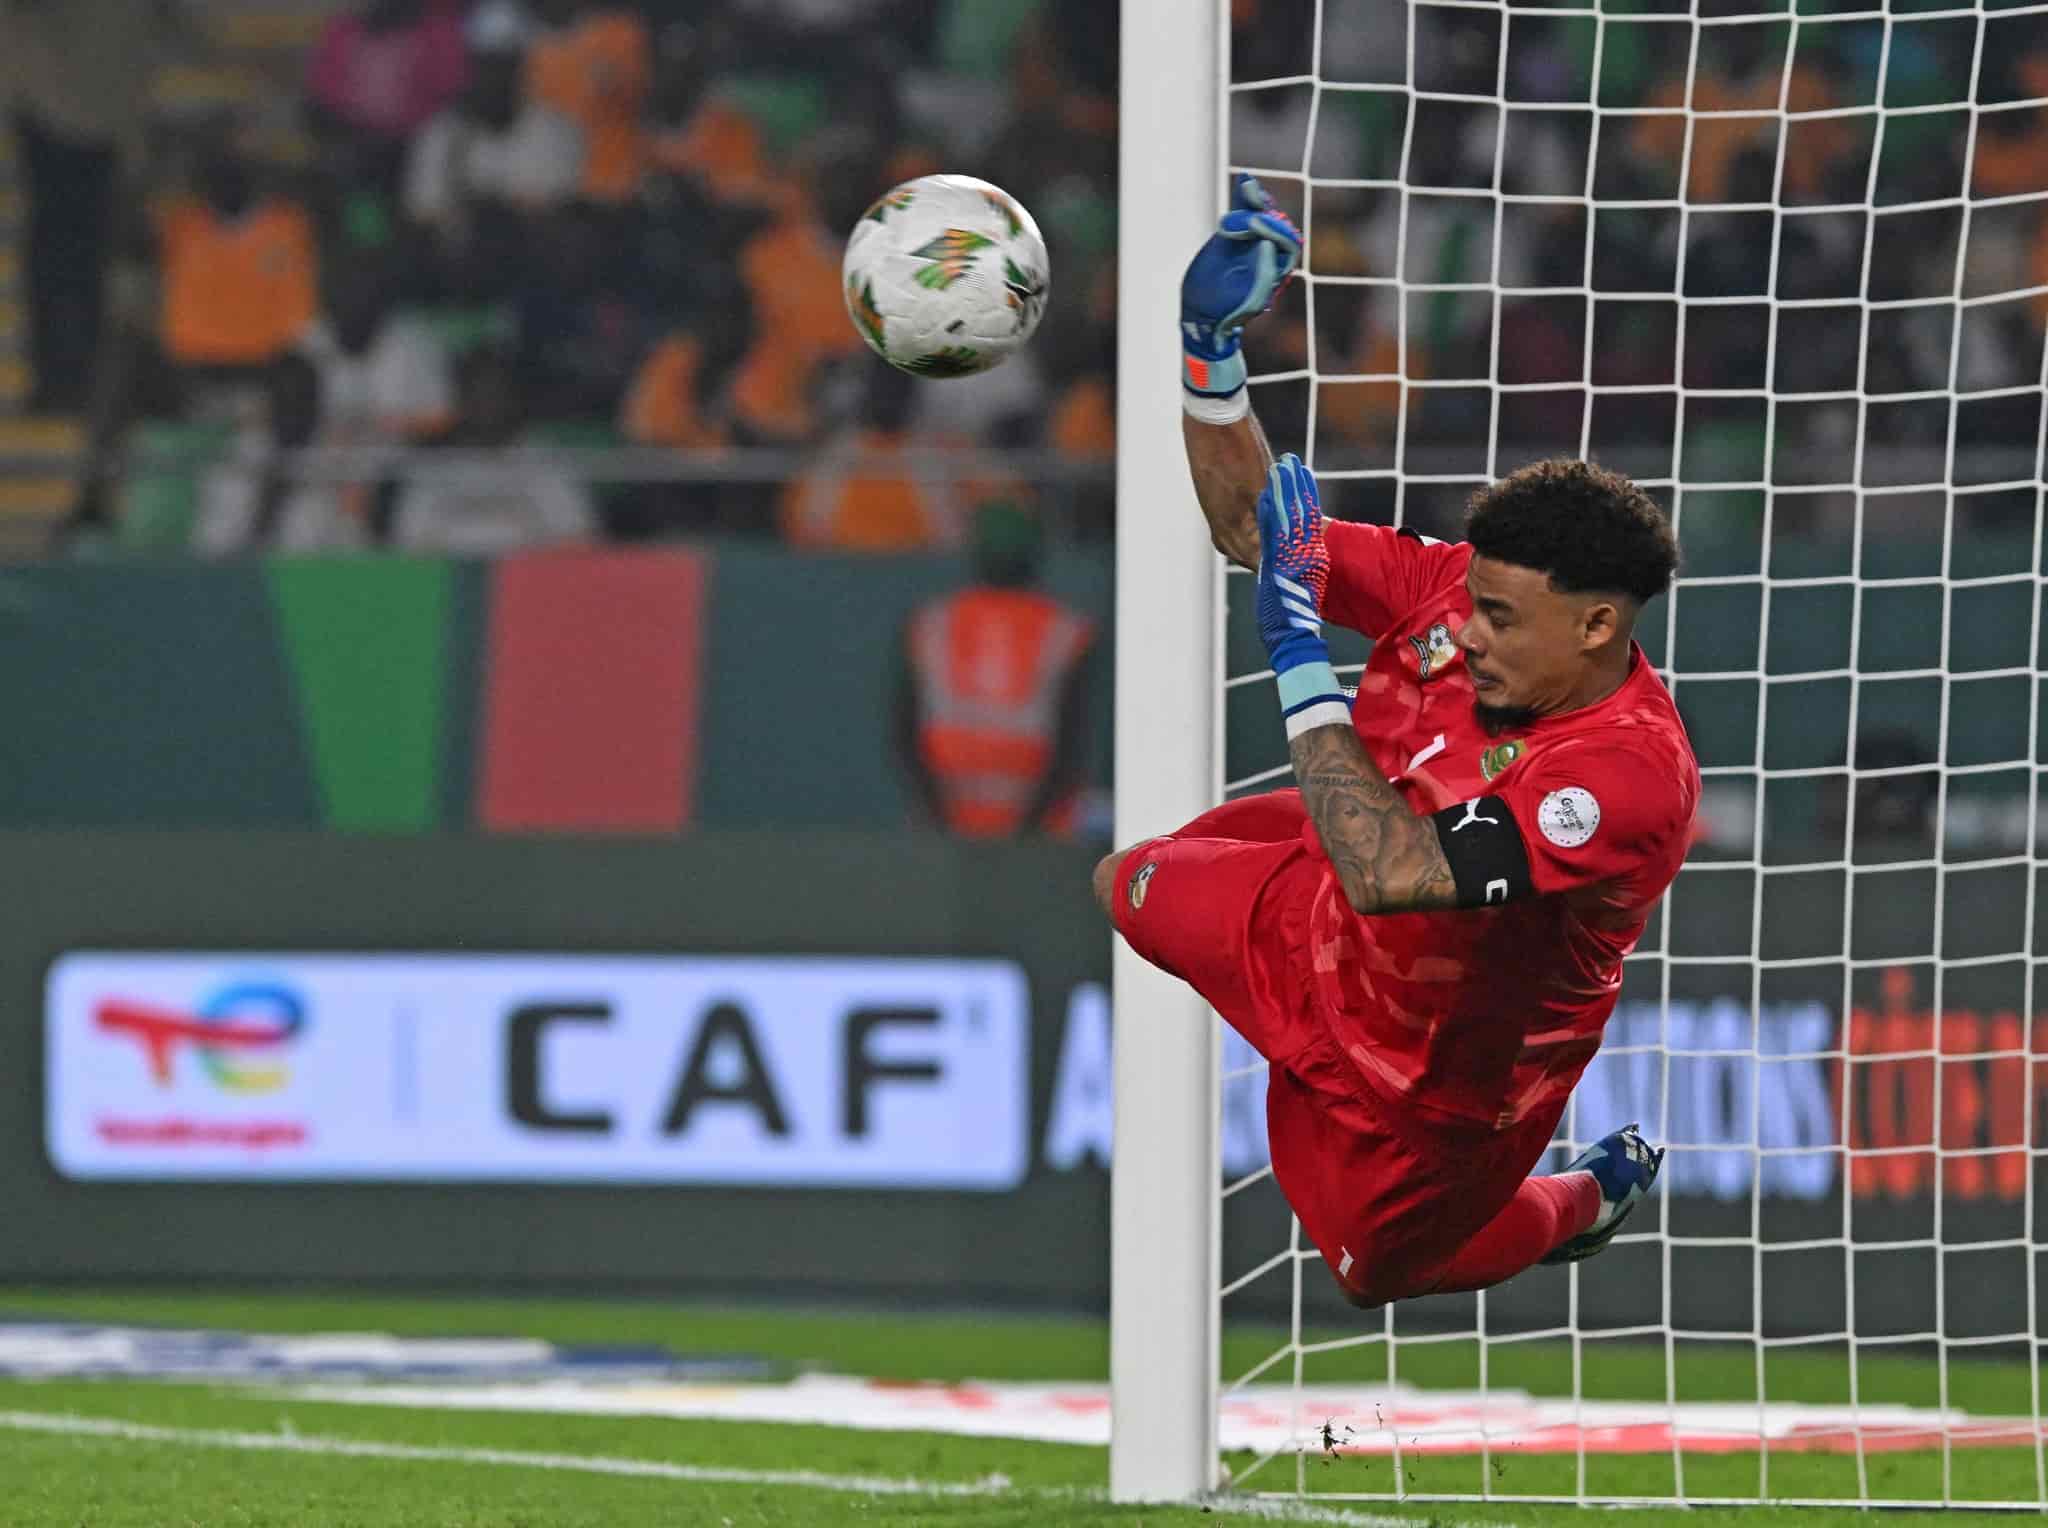 In a thrilling quarter-final clash at the 2023 Africa Cup of Nations, South Africa secured a spot in the semi-finals after a dramatic penalty shootout against Cape Verde.